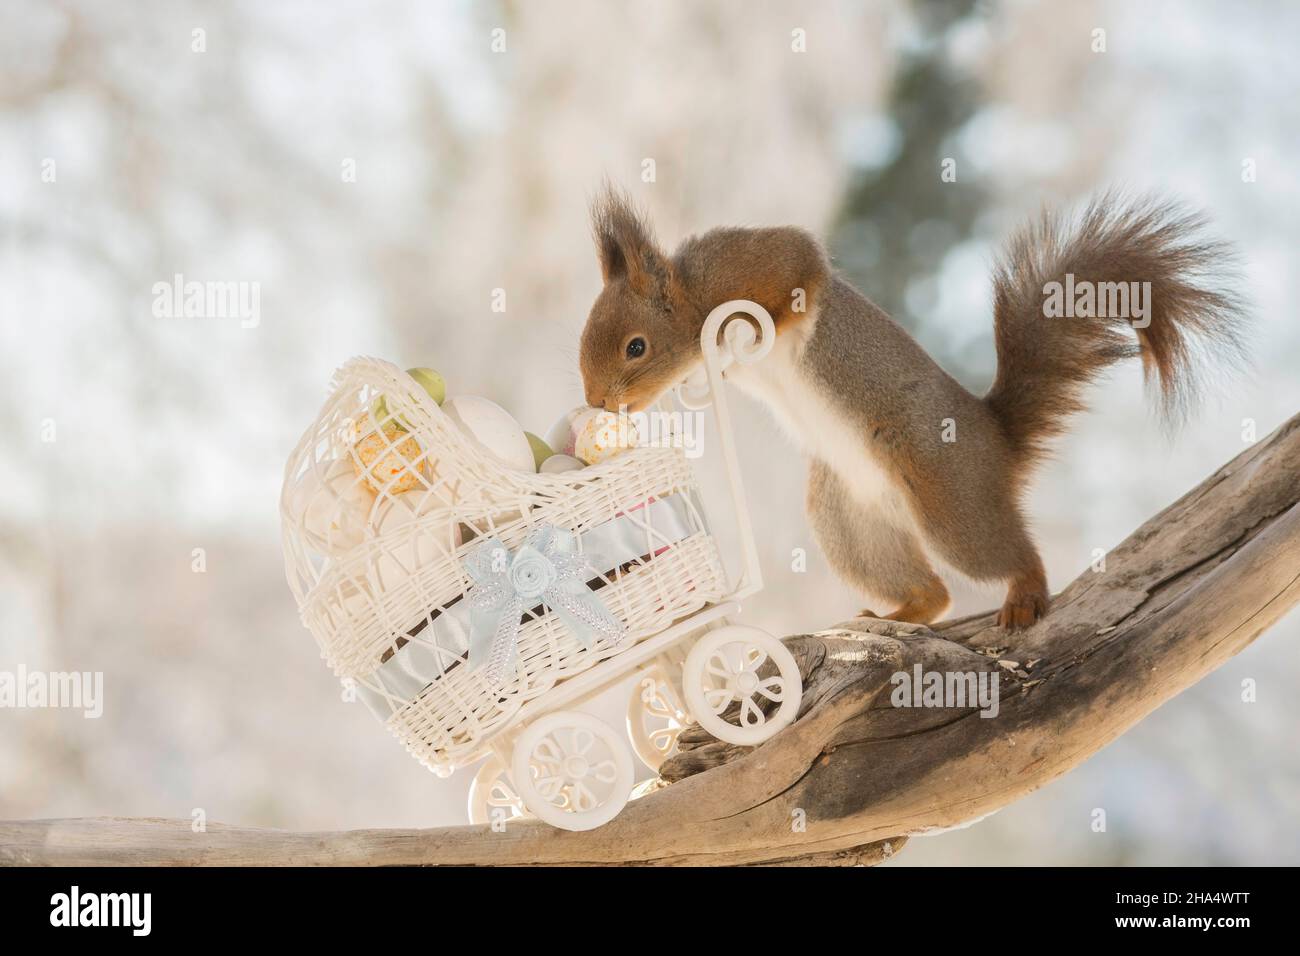 close up of red squirrel with a stroller filled with eggs Stock Photo